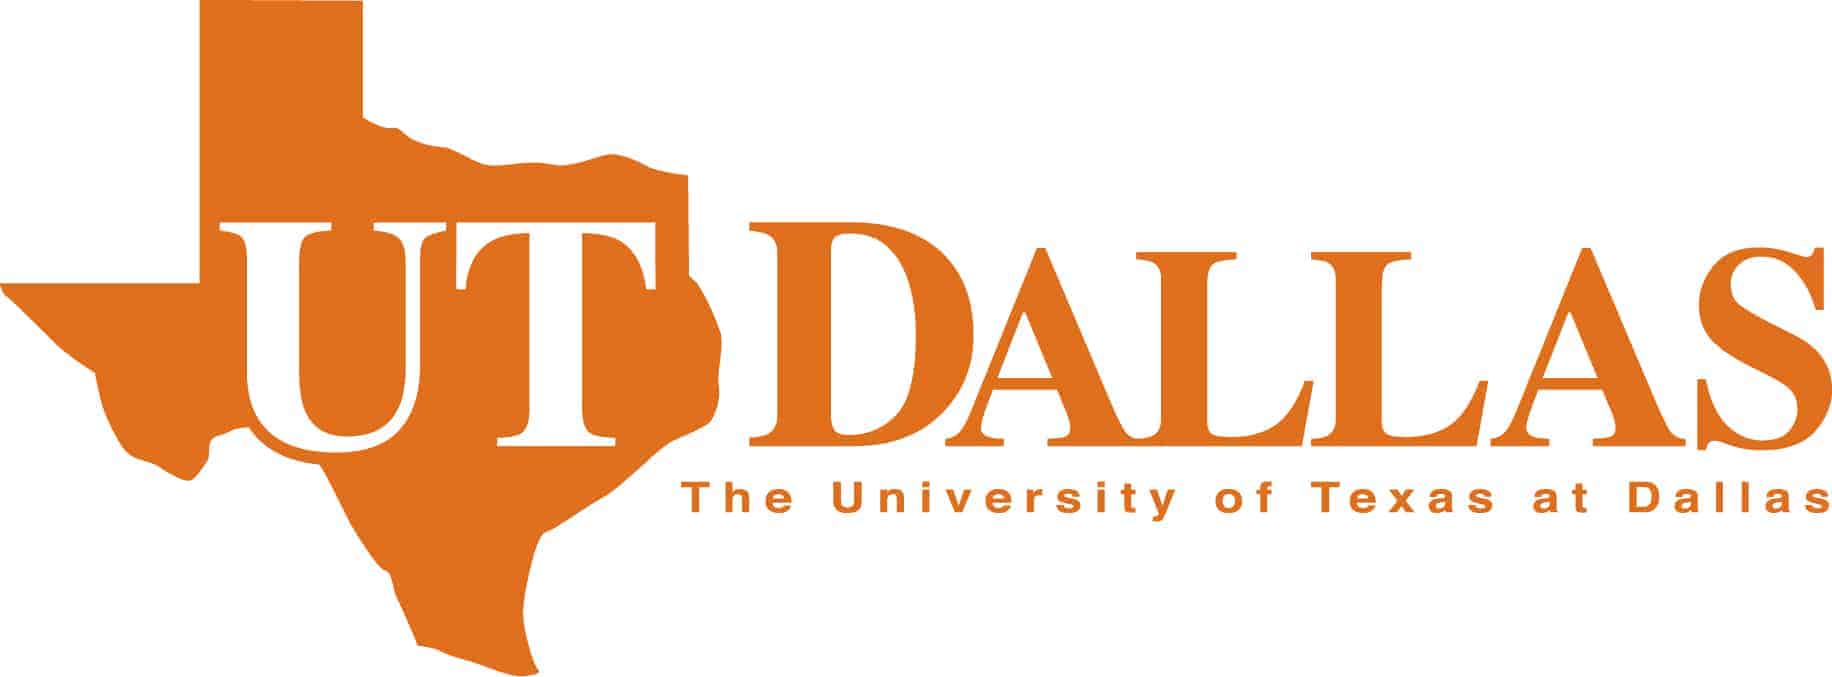 online mba the university of texas at dallas logo 177178